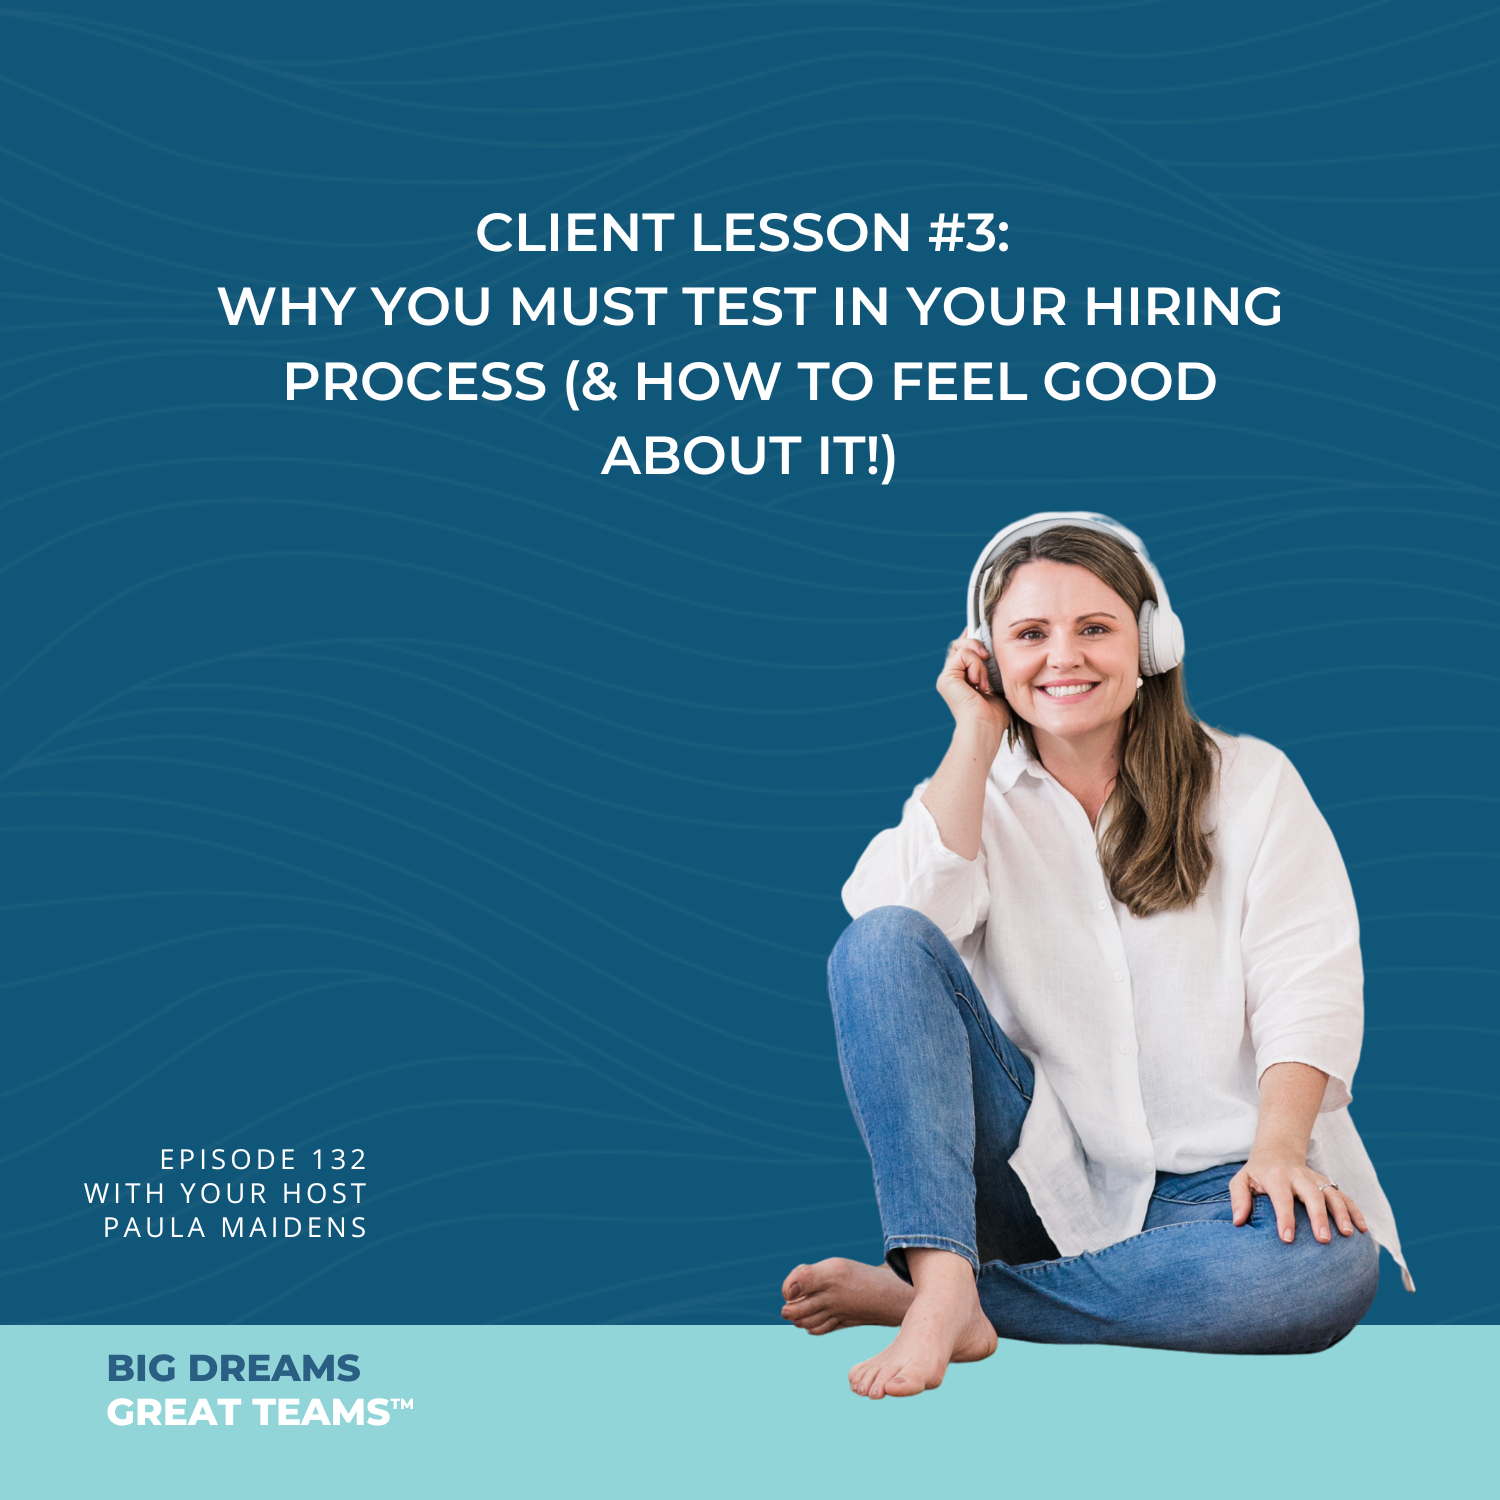 Episode 132 - Client Lesson #3: Why You Must TEST In Your Hiring Process (& how to feel good about it!)